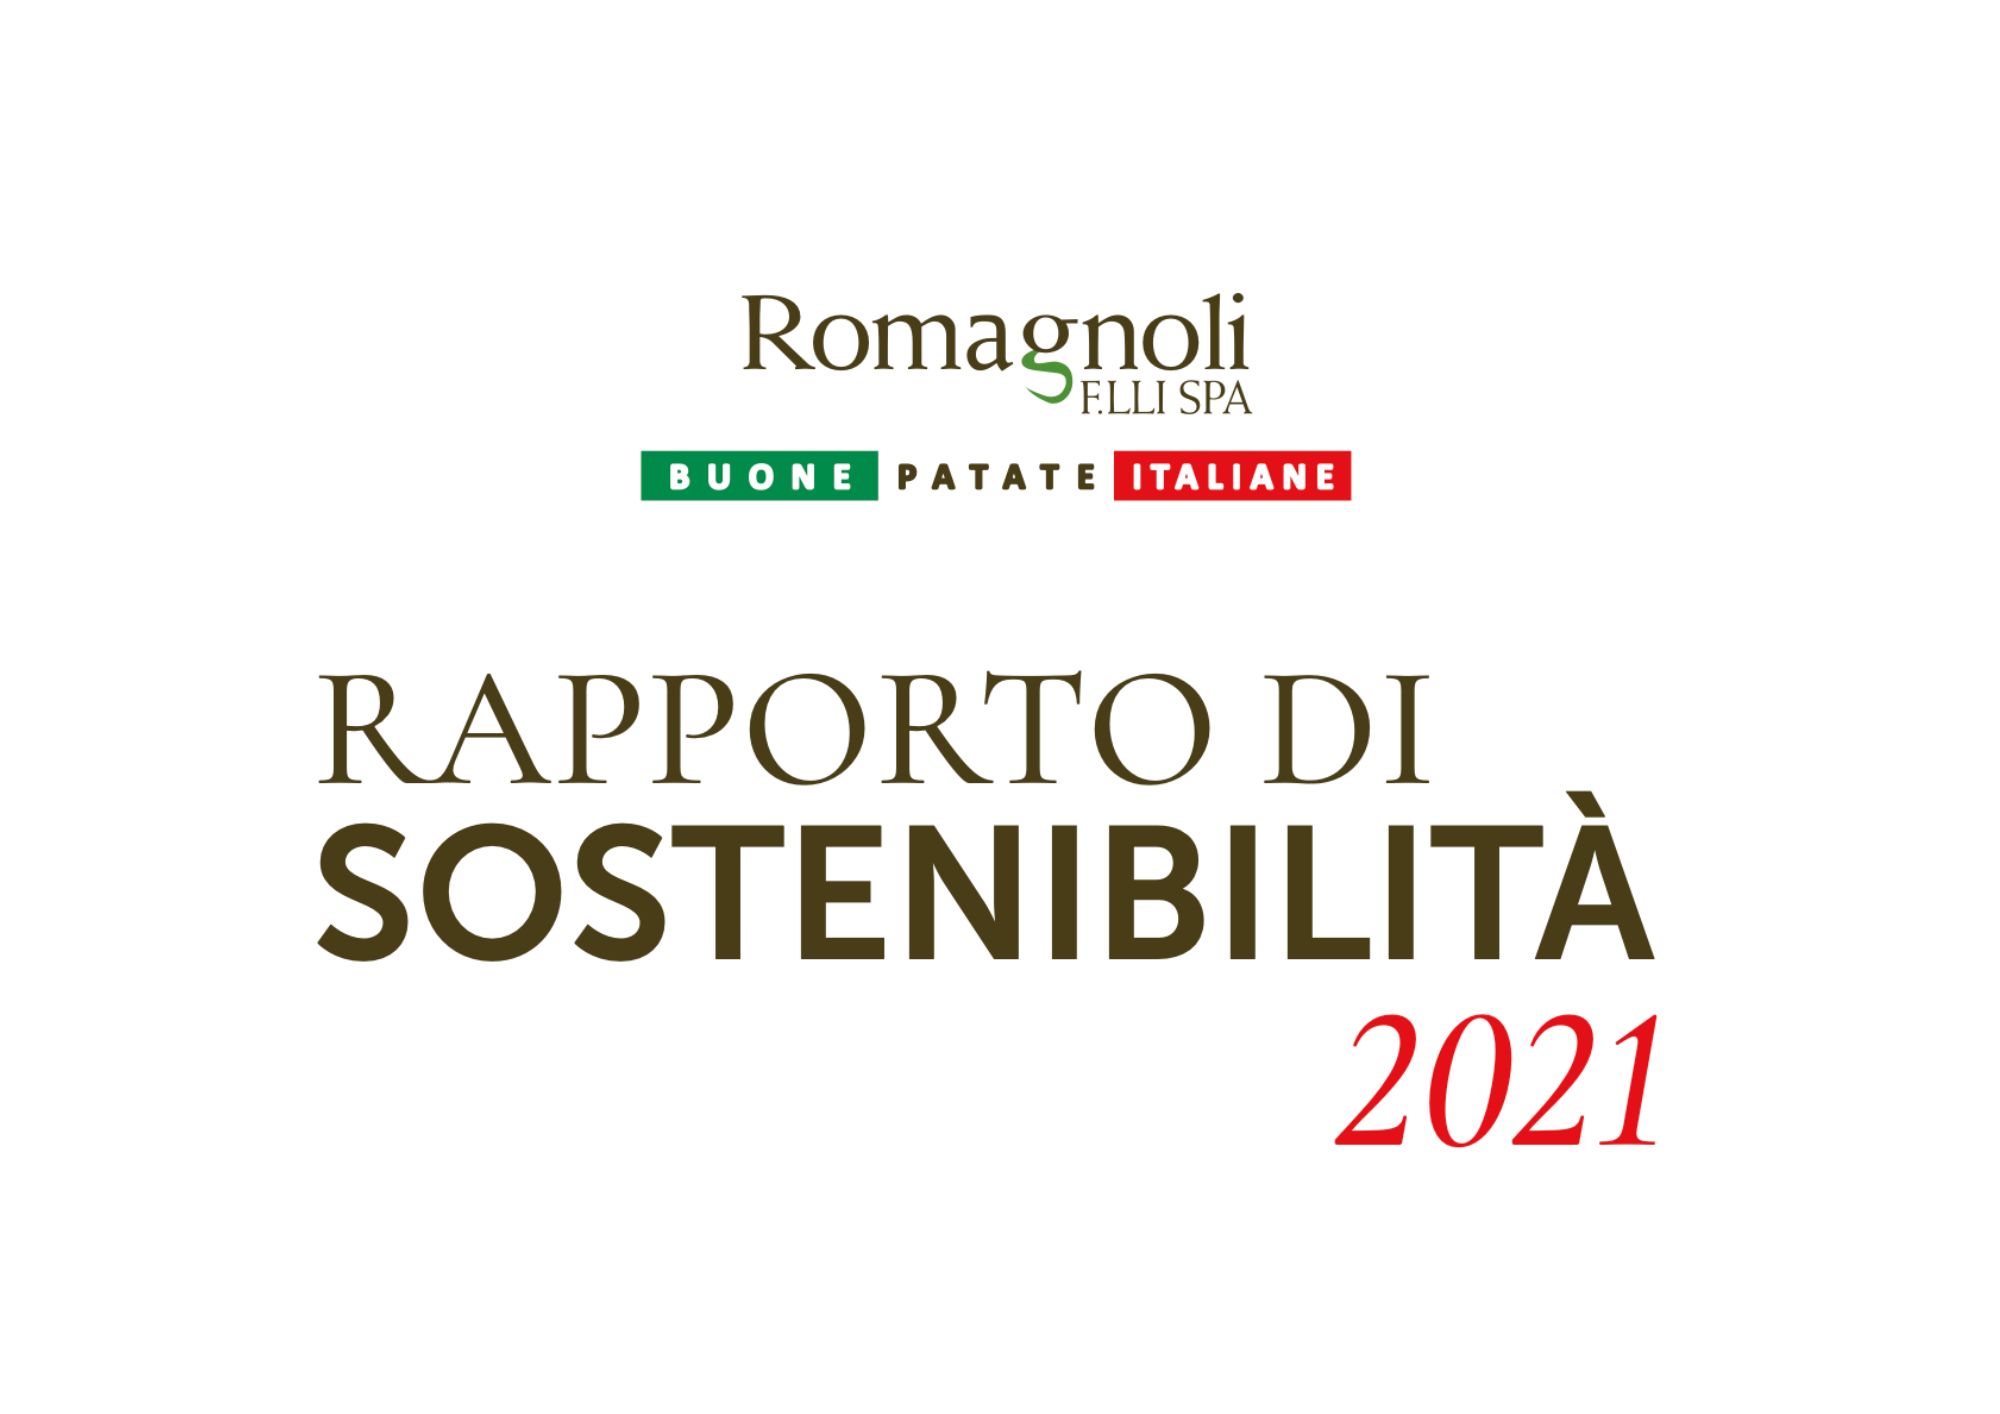 Romagnoli F.lli: the supply chain, innovation and social responsibility in the second sustainability report